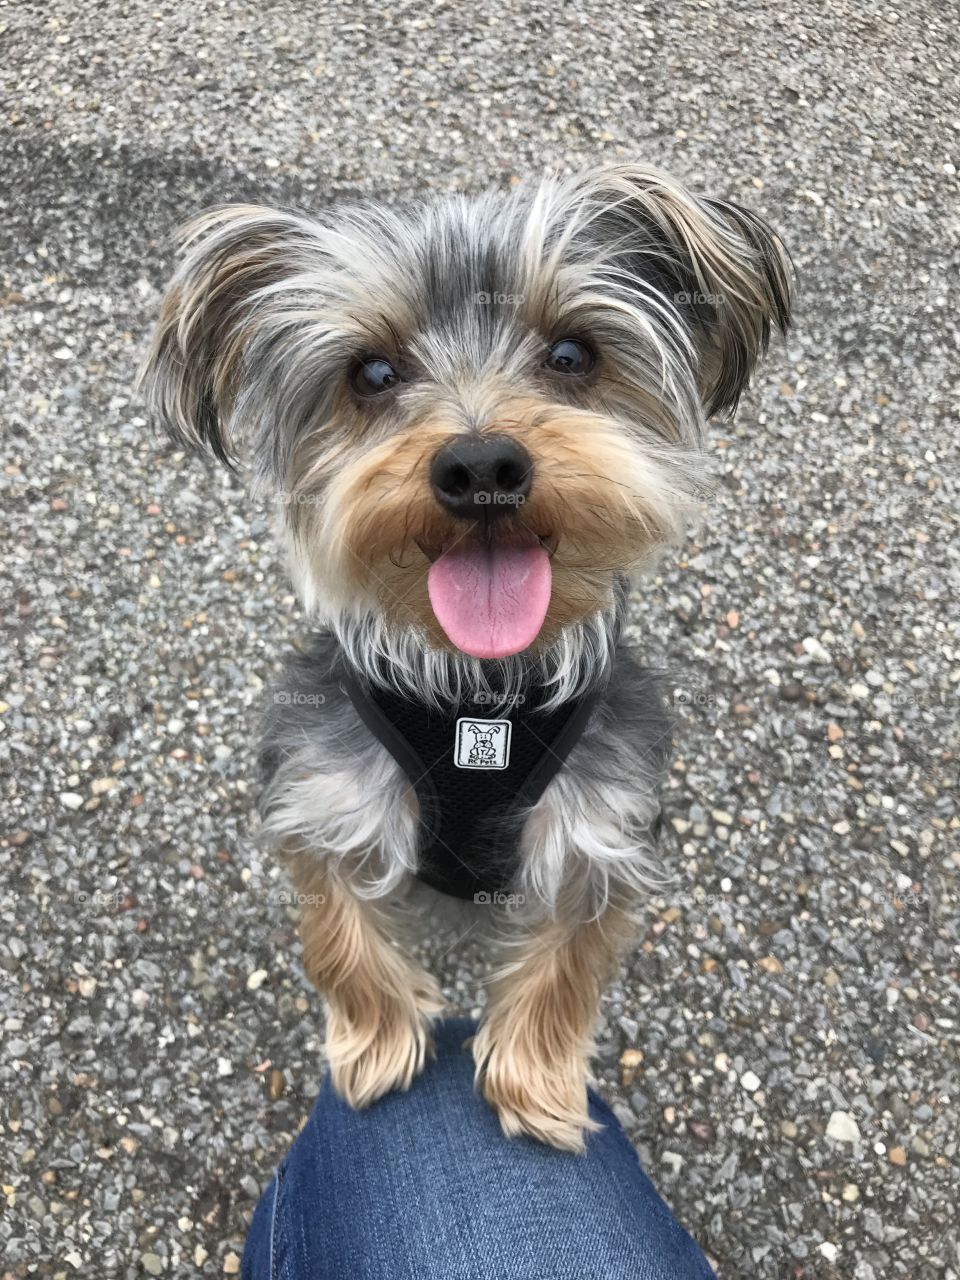 Cute yorkie dog smiling with tongue out. 